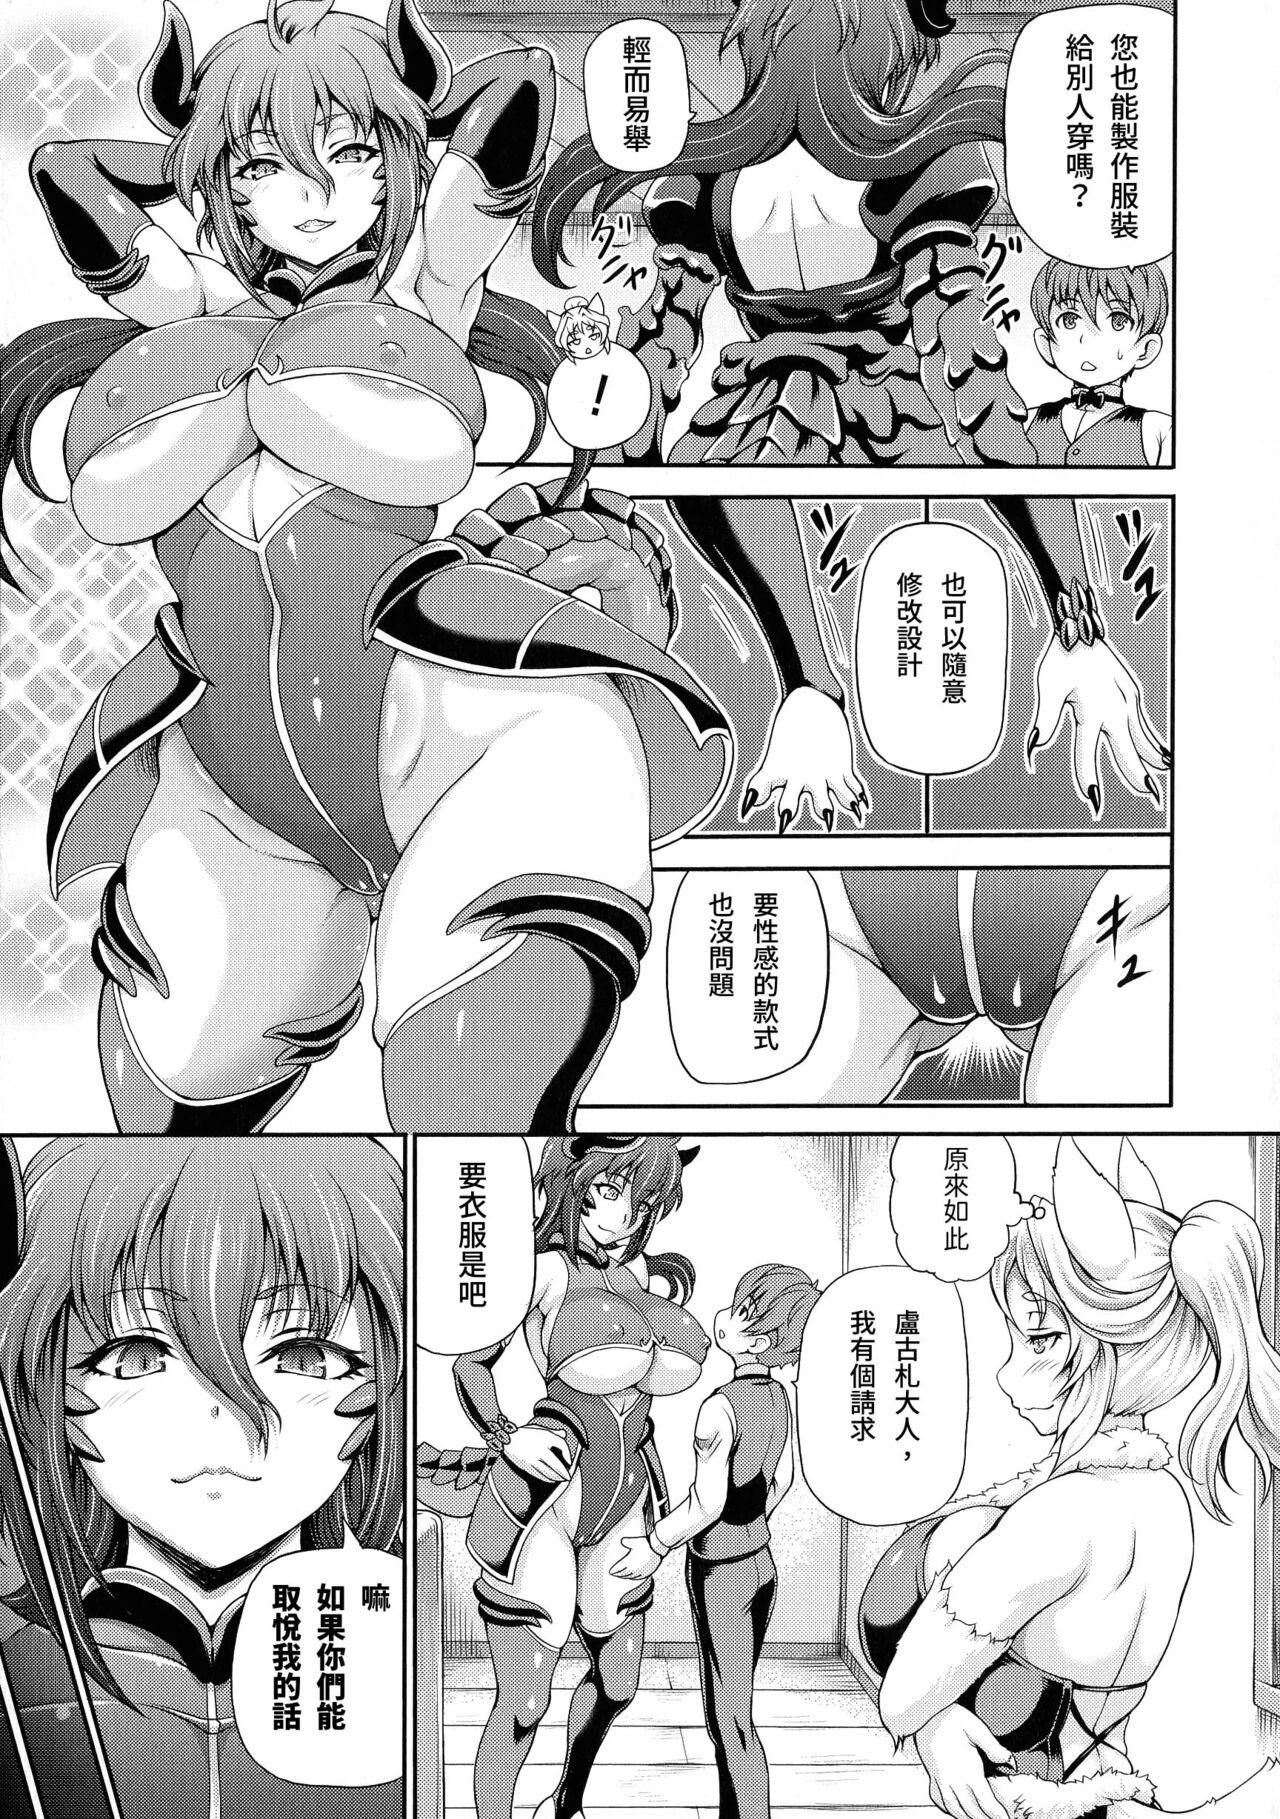 Doggystyle Porn Isekai Shoukan 2 Ch. 1-3 Black Hair - Page 7